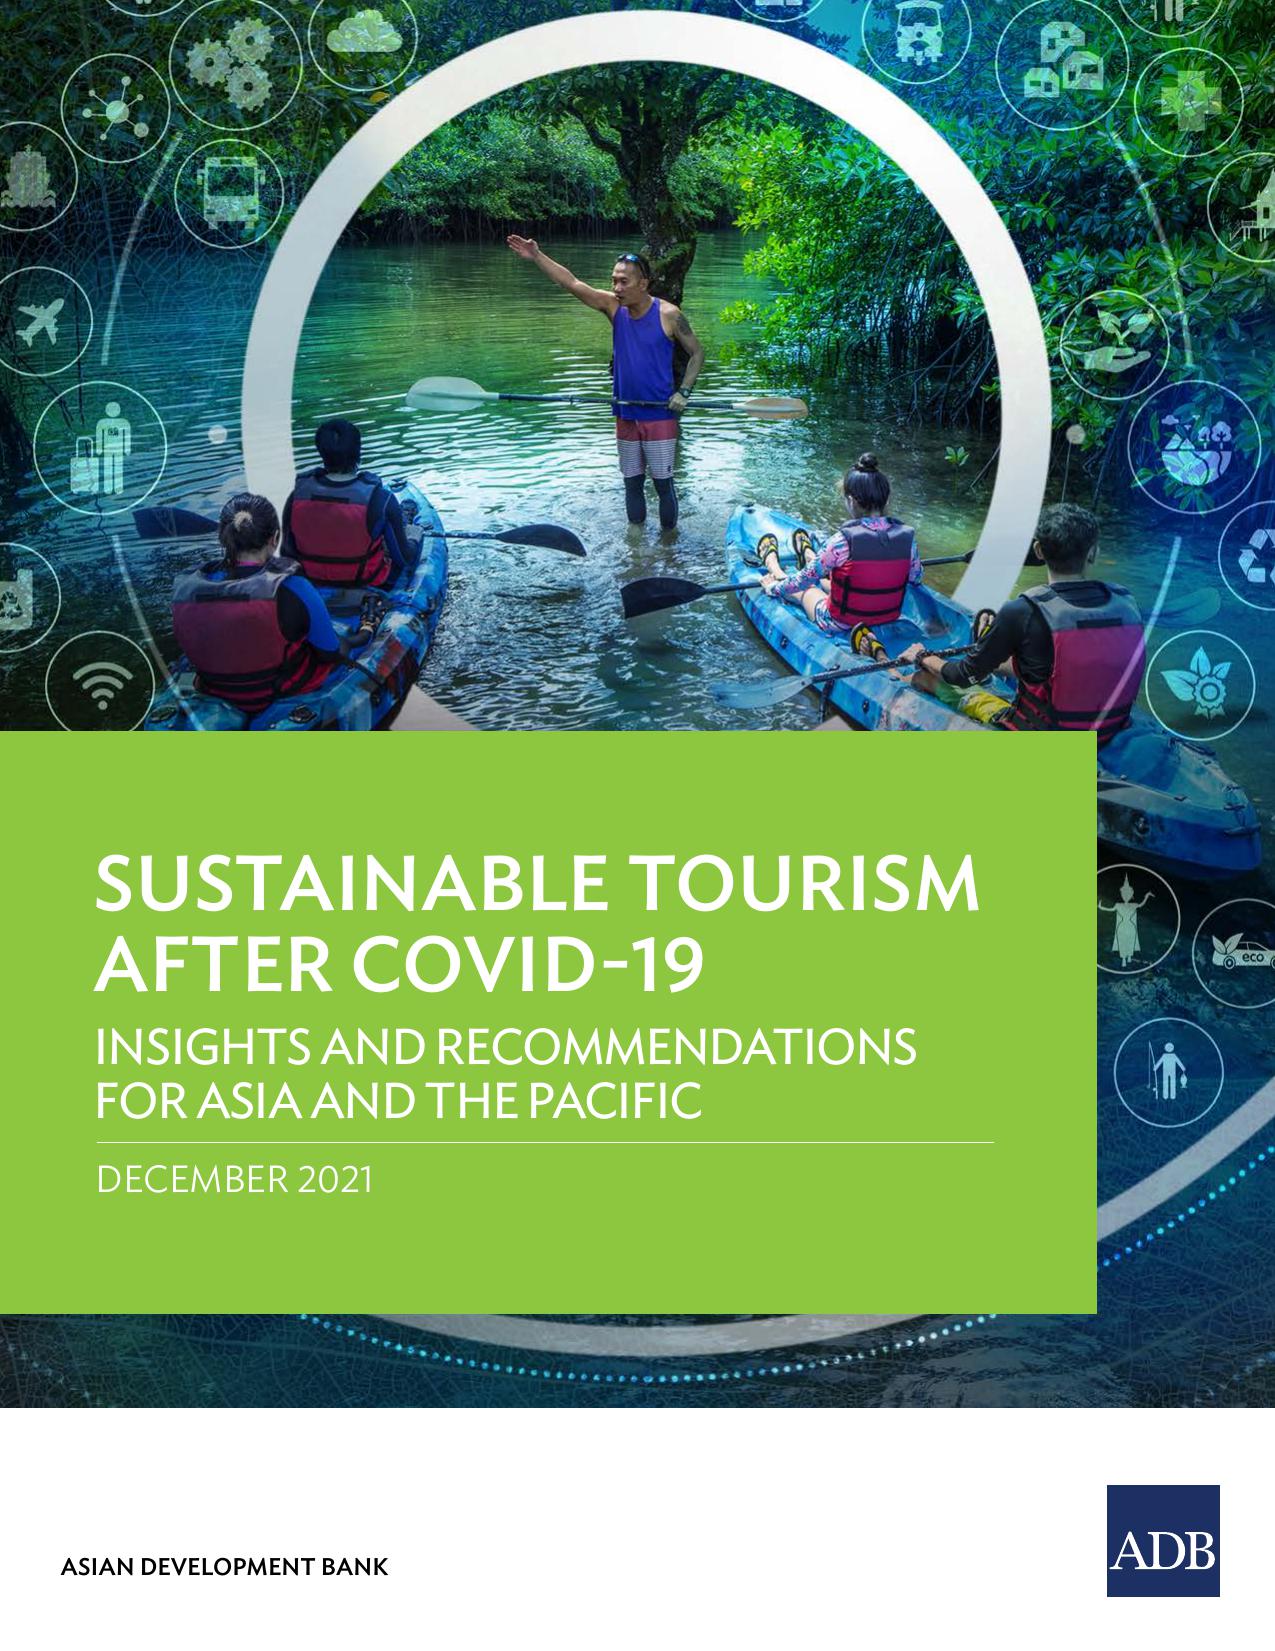 tourism after covid 19 essay